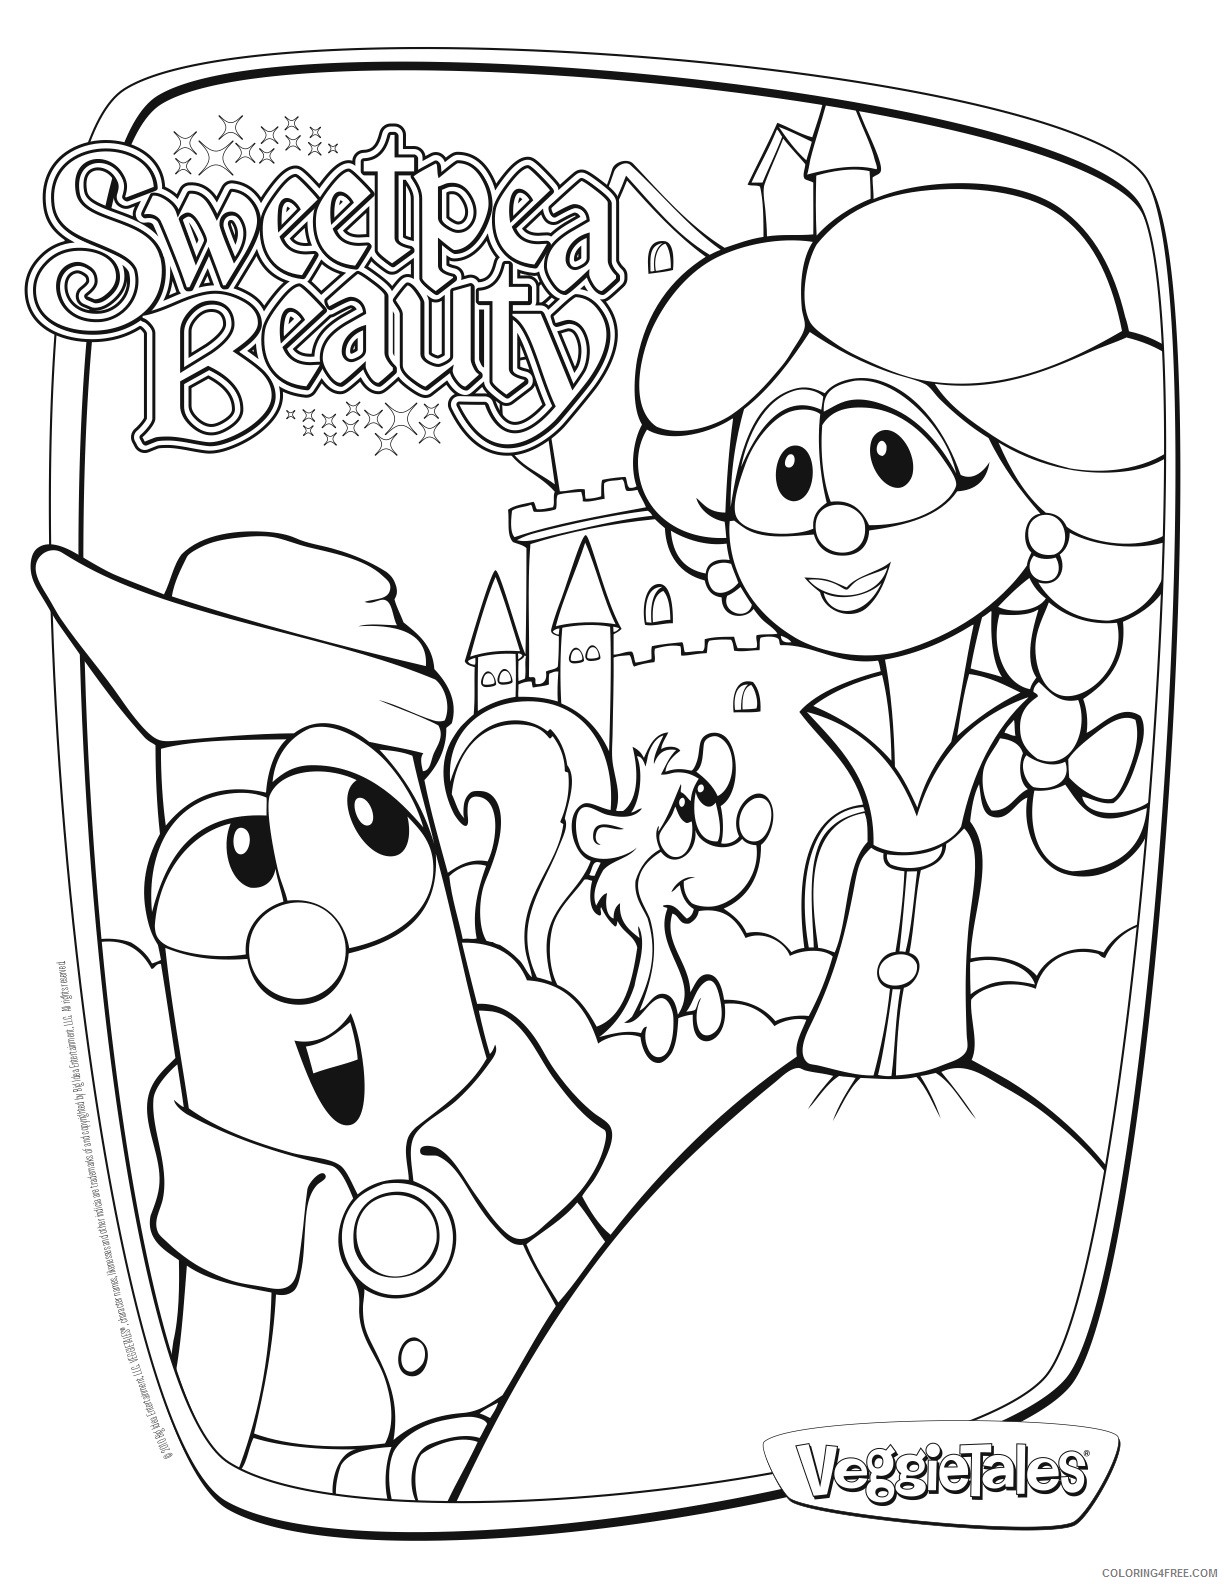 veggie tales coloring pages sweet pea beauty Coloring4free